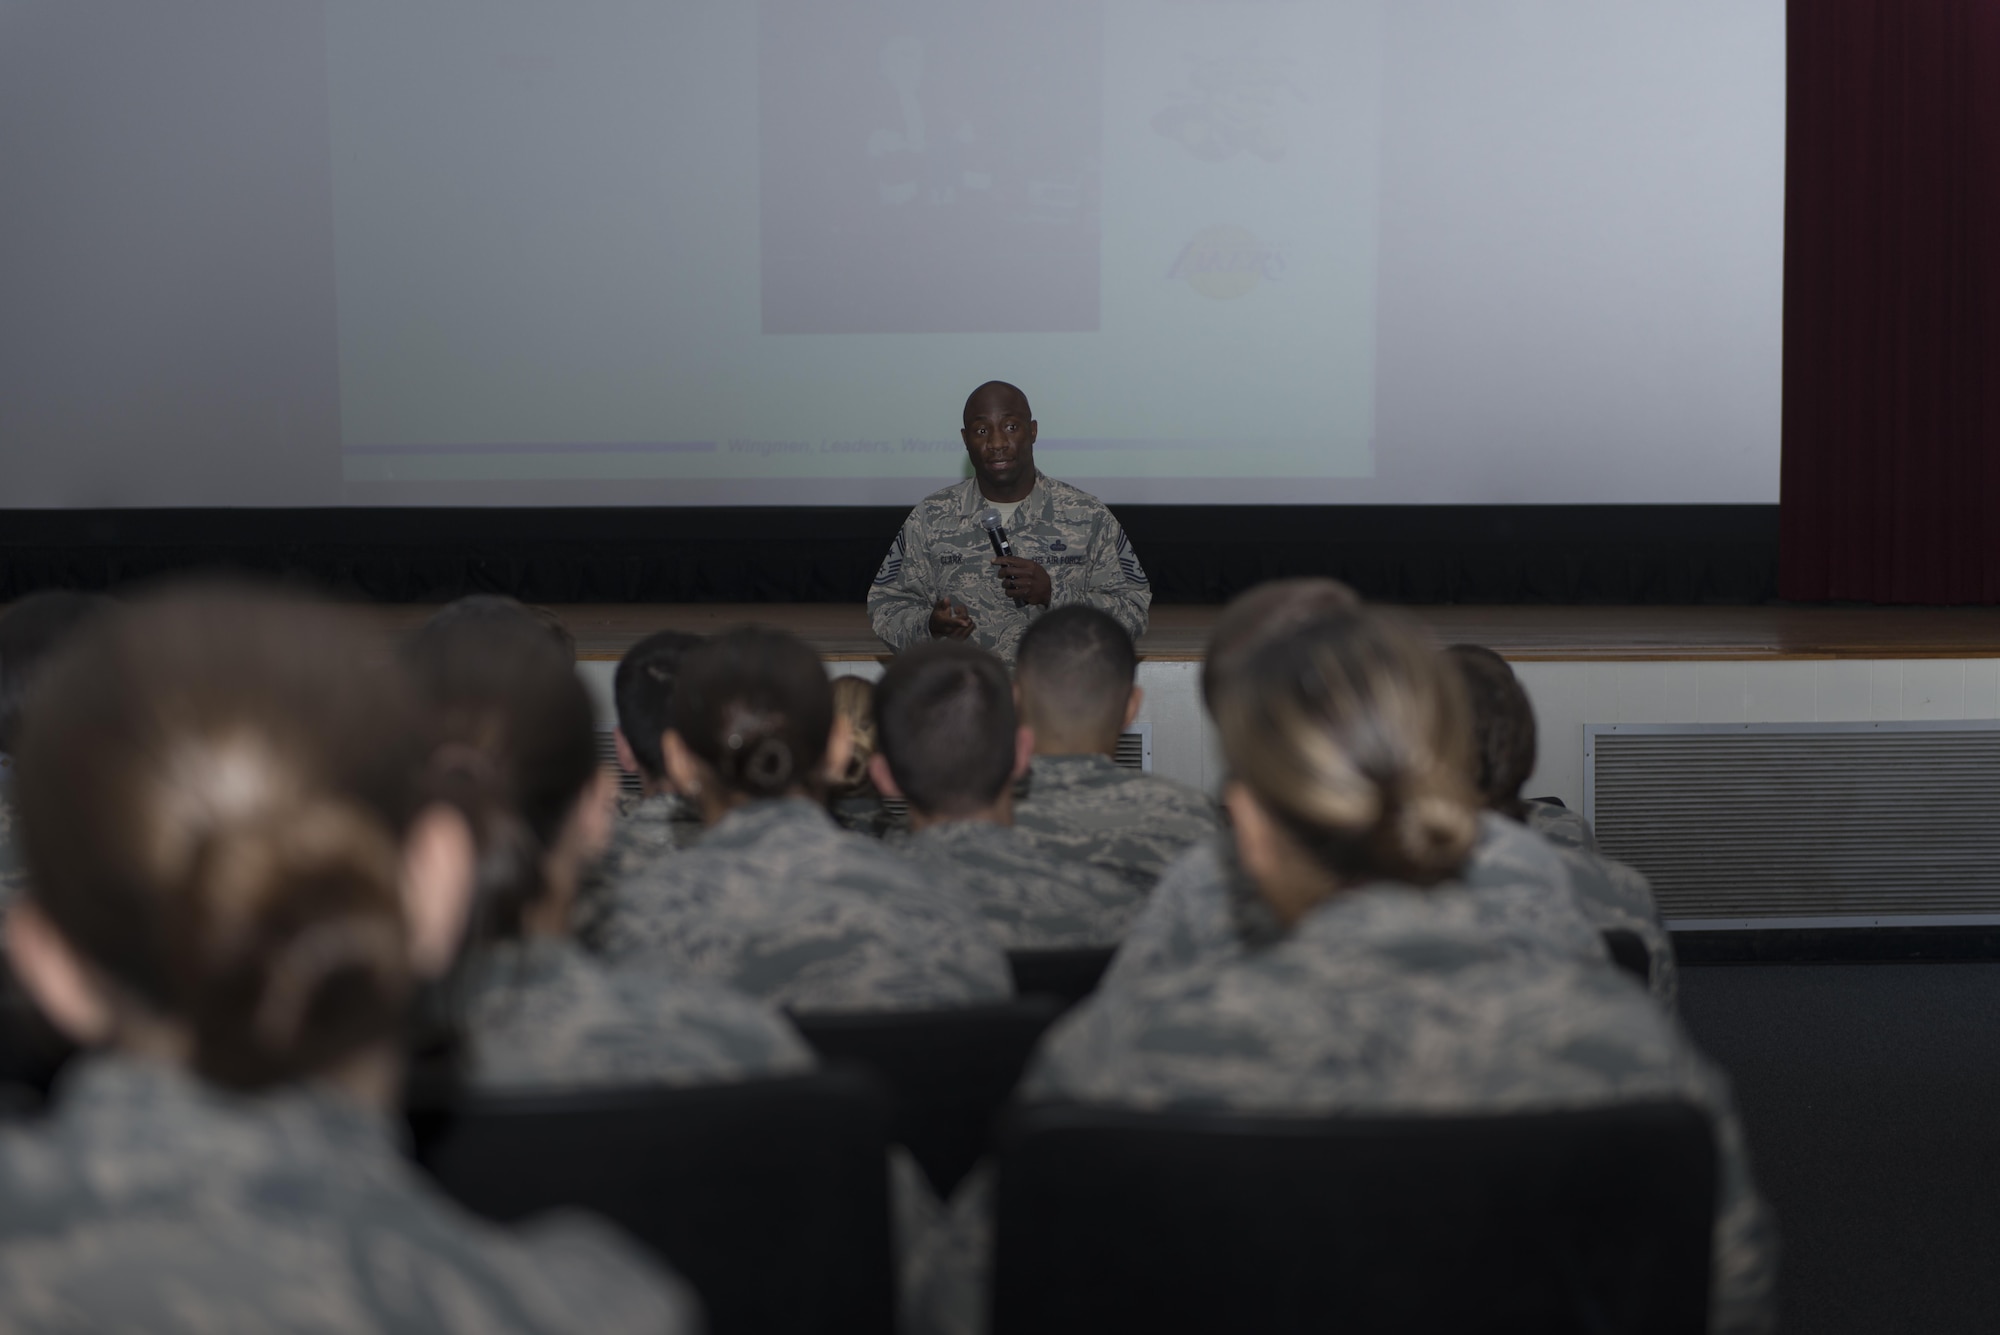 Chief Master Sgt. Vegas Clark, 81st Training Wing command chief, speaks to Airmen during an enlisted call at the Welch Theater Oct 12, 2016, on Keesler Air Force Base, Miss. During the enlisted call, Clark discussed his expectations, the commander’s vision, the future of Airmen’s careers and various topics around the base. (U.S. Air Force photo by Andre’ Askew/Released)